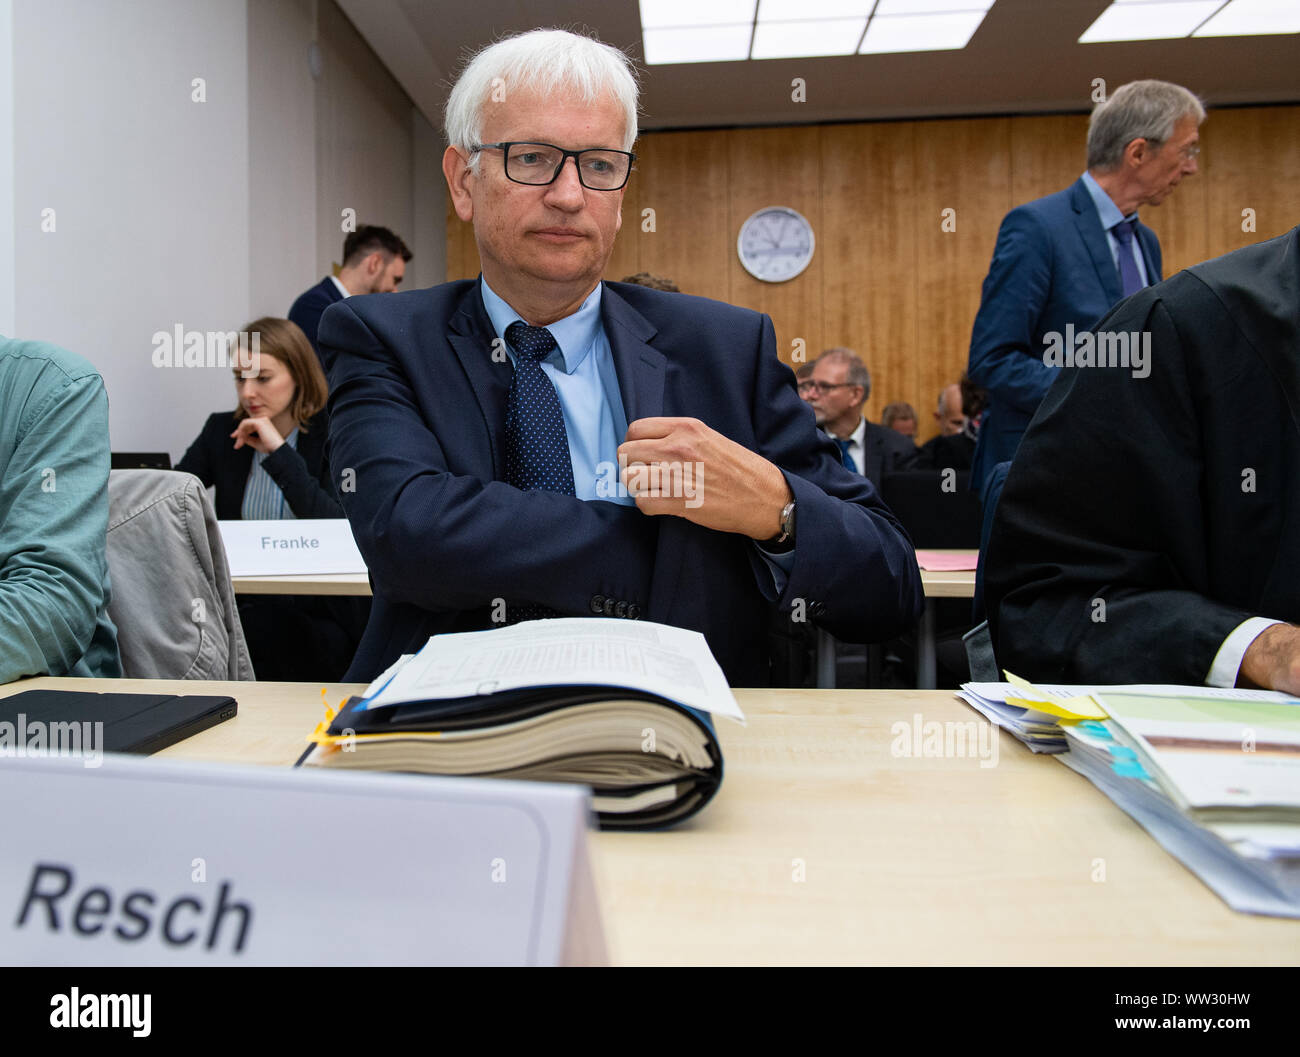 12 September 2019, North Rhine-Westphalia, Münster: Jürgen Resch, Federal Managing Director of Deutsche Umwelthilfe, sits before the hearing at the Higher Administrative Court in Münster. The Higher Administrative Court for North Rhine-Westphalia (Oberverwaltungsgericht für NRW) is hearing the action brought by Deutsche Umwelthilfe. The DUH is suing for an update of the clean air plan of the district government of Cologne for the city of Cologne. The aim is to take measures to ensure that the limit values for nitrogen dioxide are complied with as quickly as possible. It is controversial whethe Stock Photo